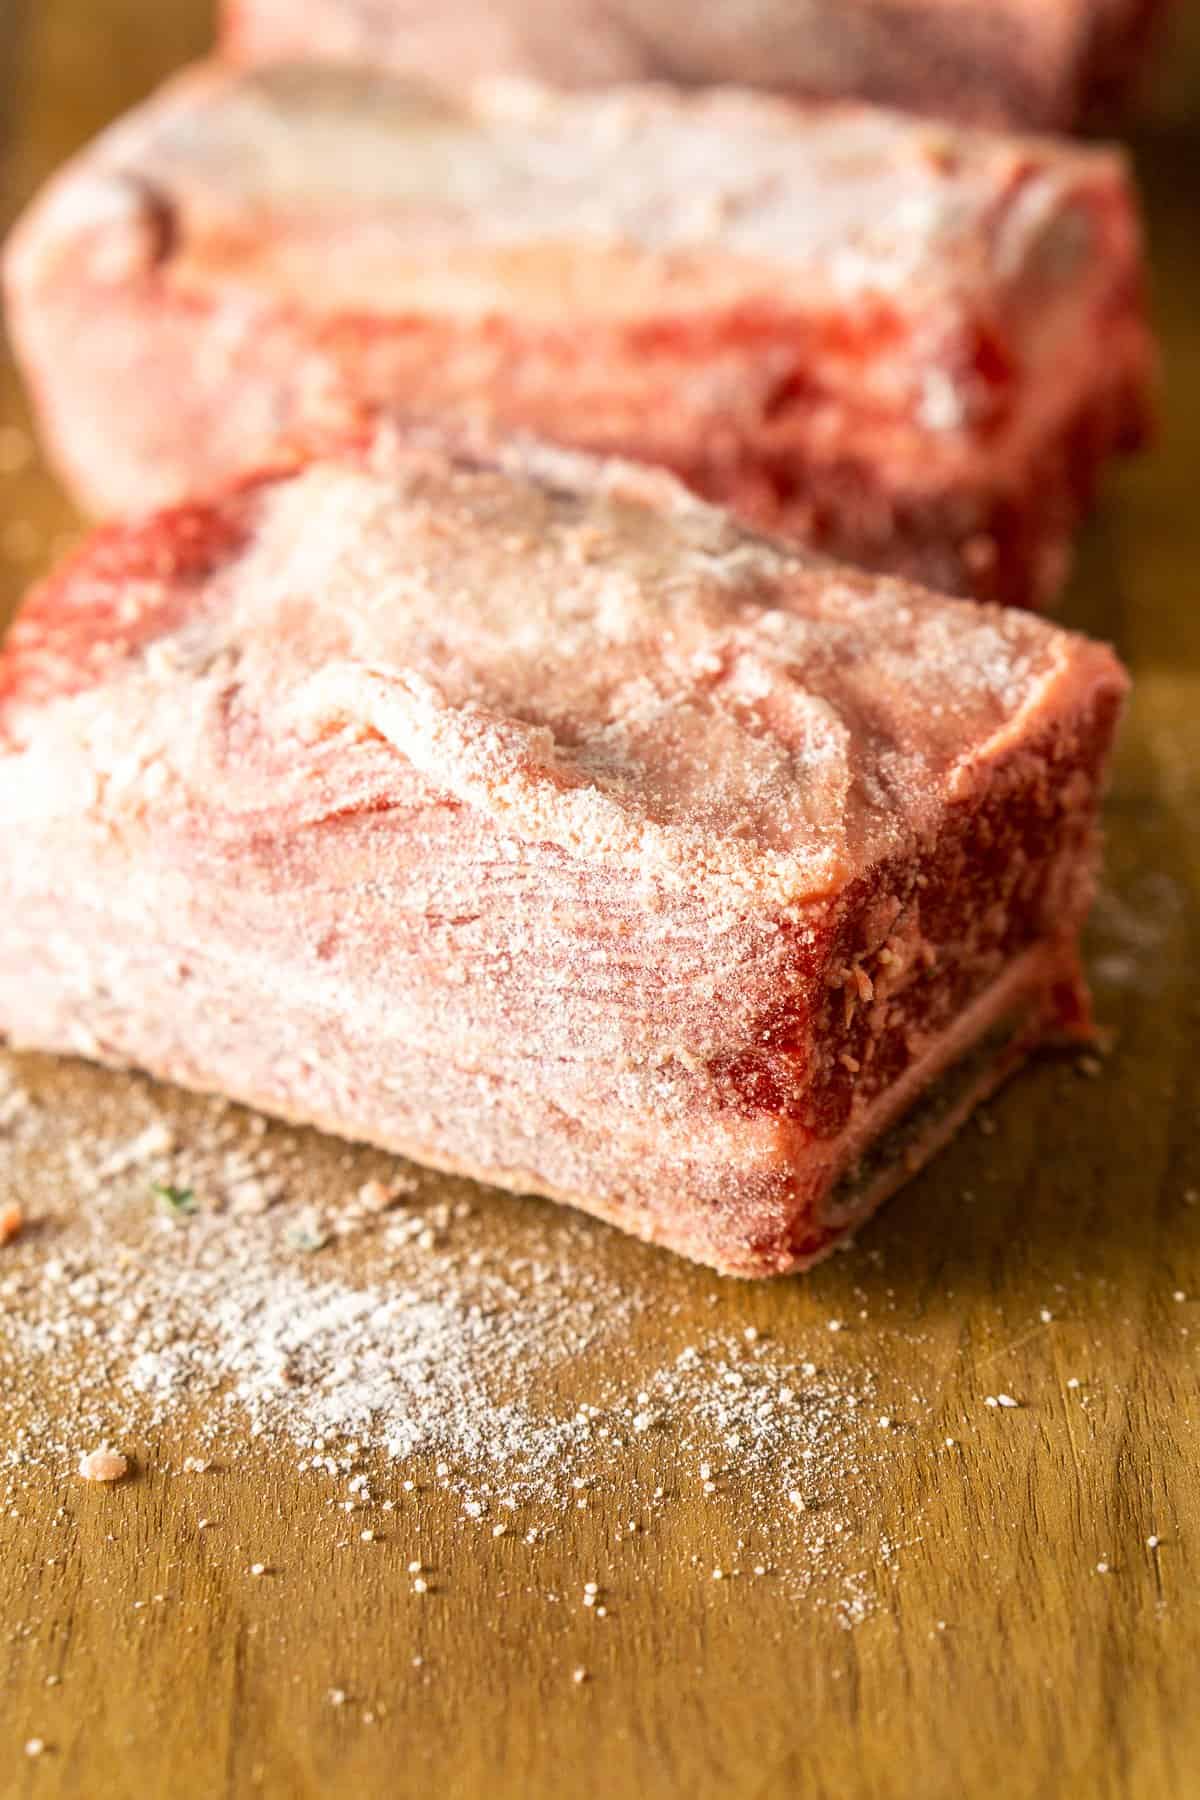 The short ribs on a wooden cutting board after being dusted with flour, salt and pepper.